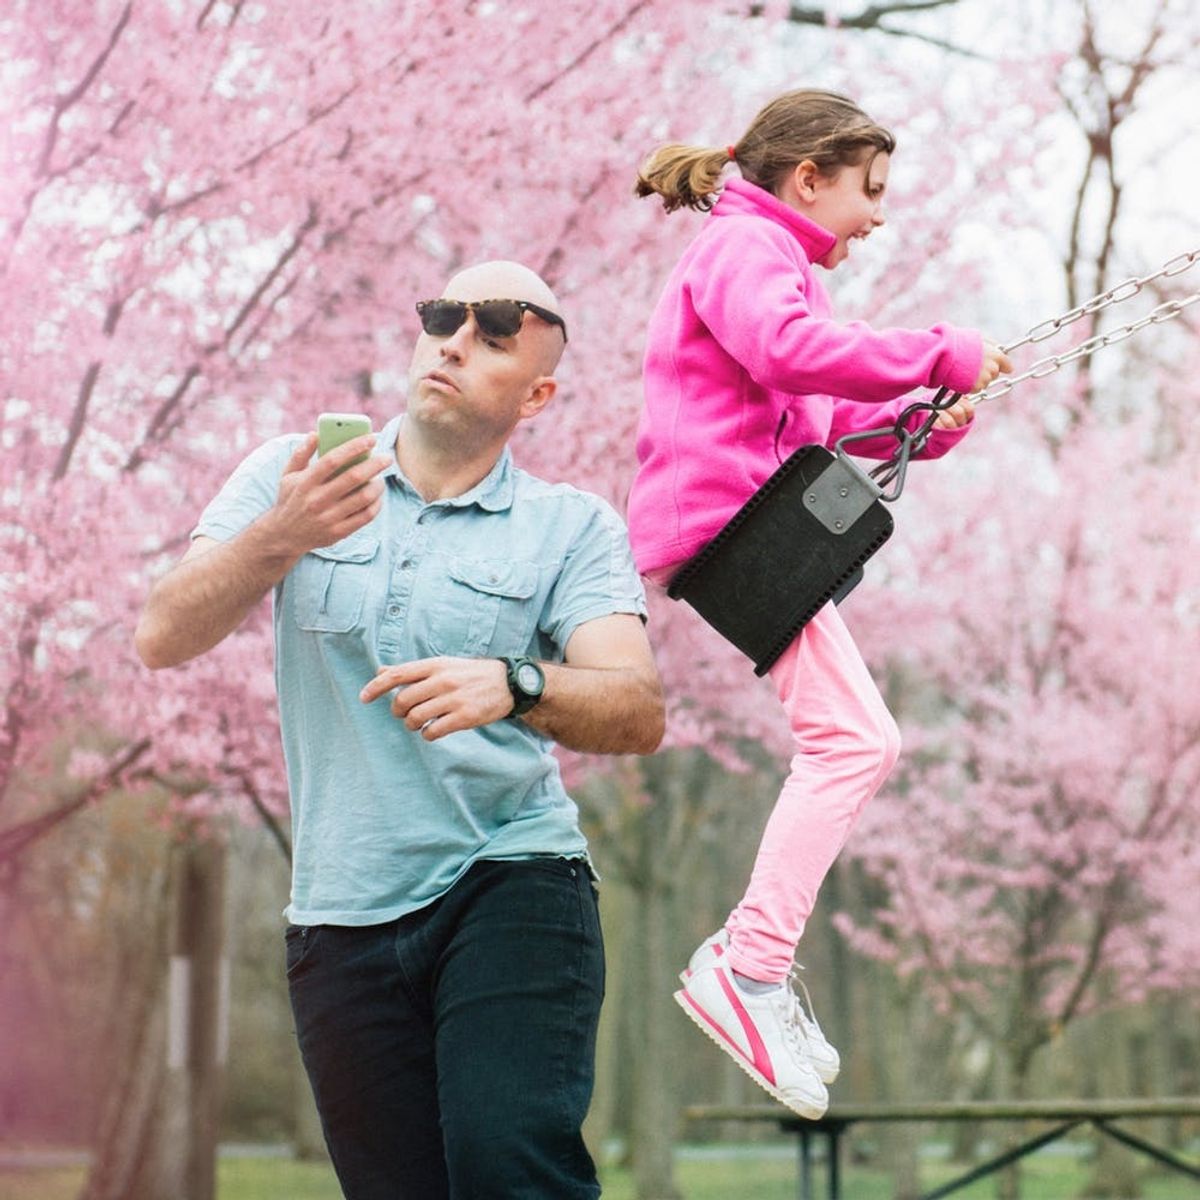 15 Heartwarming #DadFails on Instagram That Prove It Isn’t Always Easy Being Pops